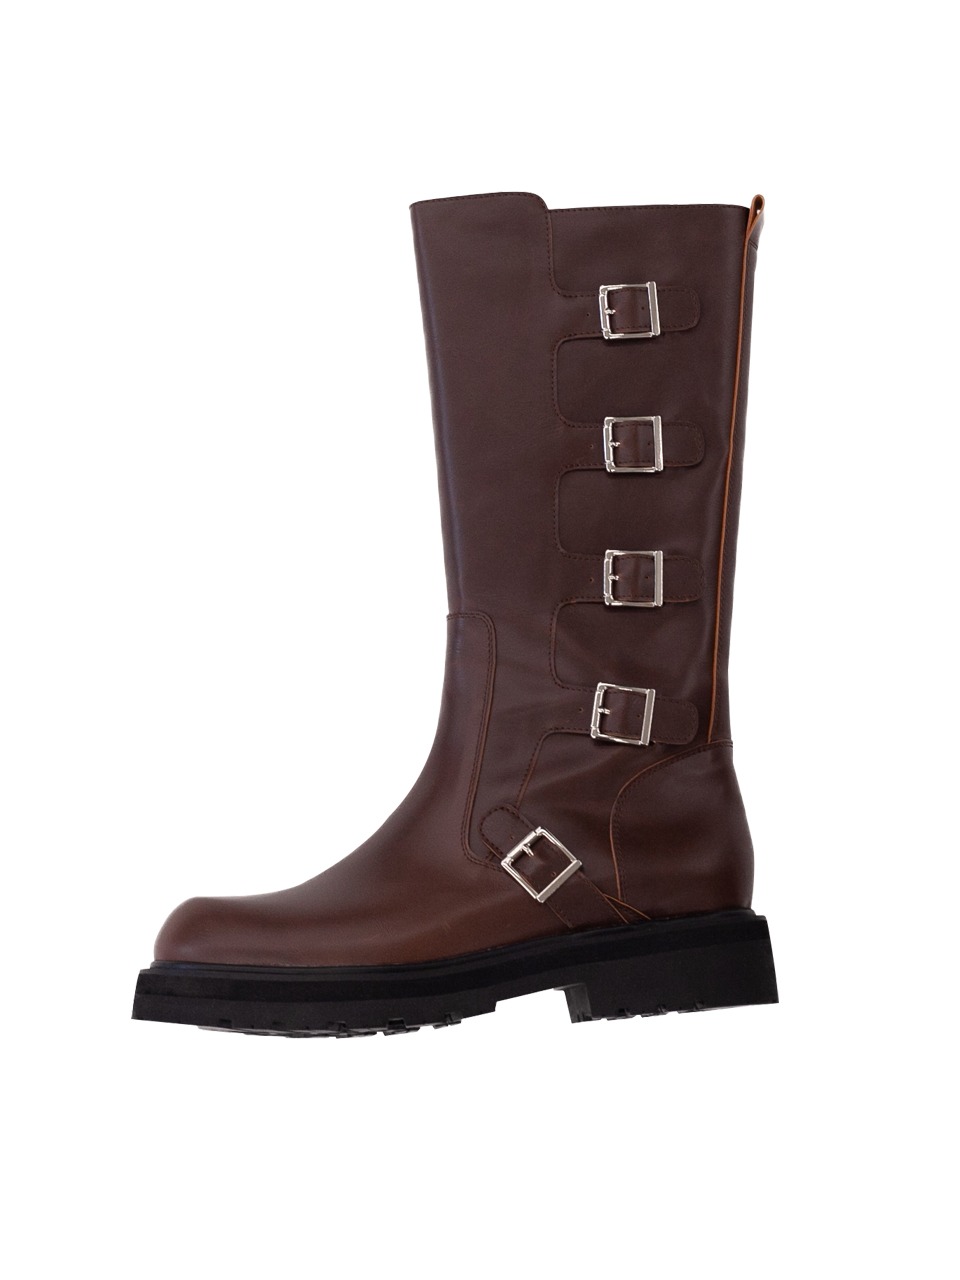 LECYTO - ROUND TOE LONG WALKER BOOTS (BROWN)